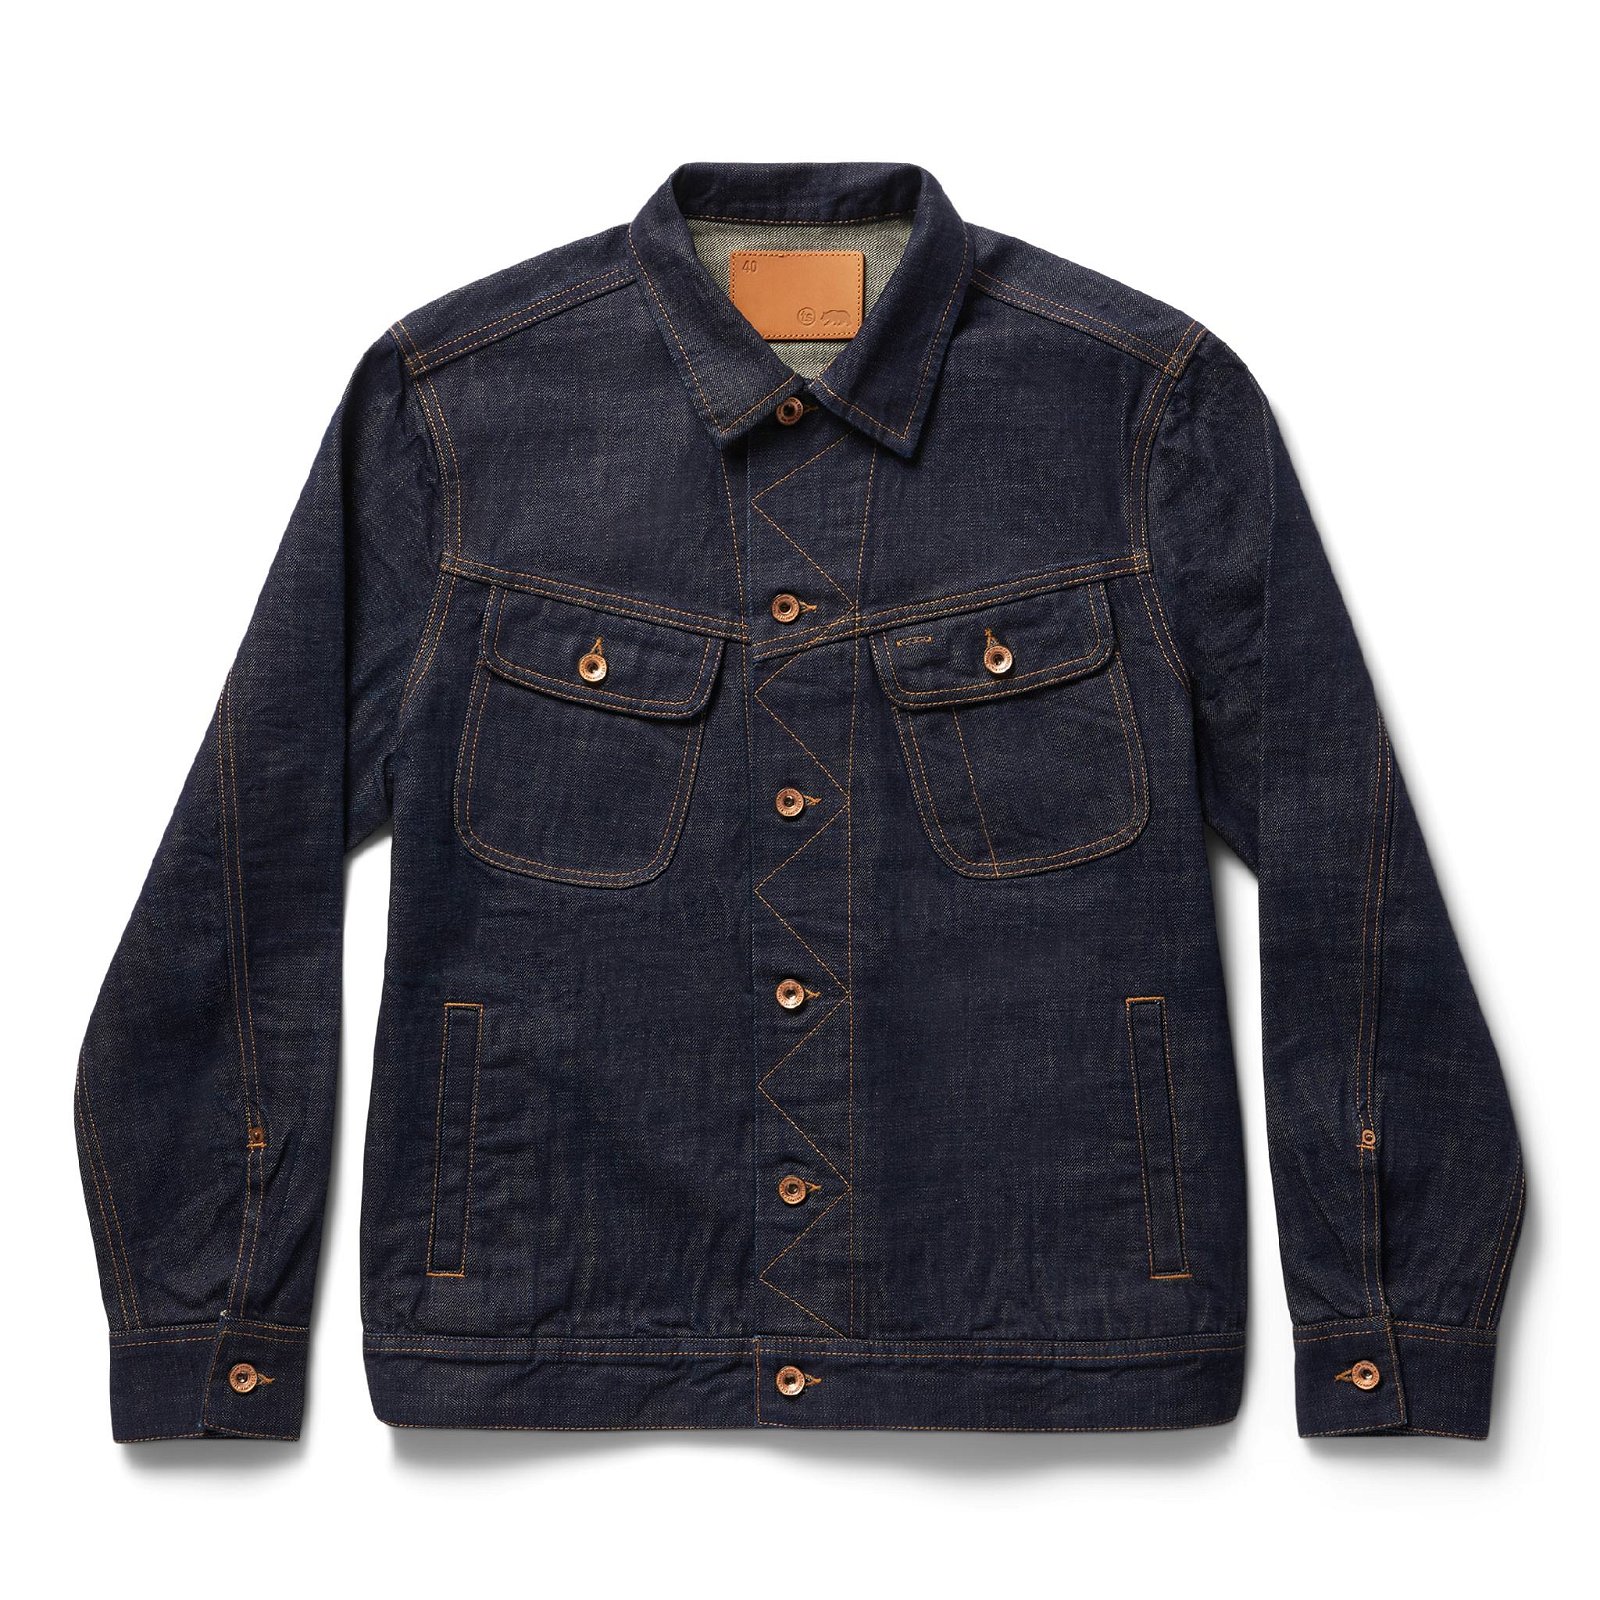 Image of The Long Haul Jacket in Rinsed Organic Selvage